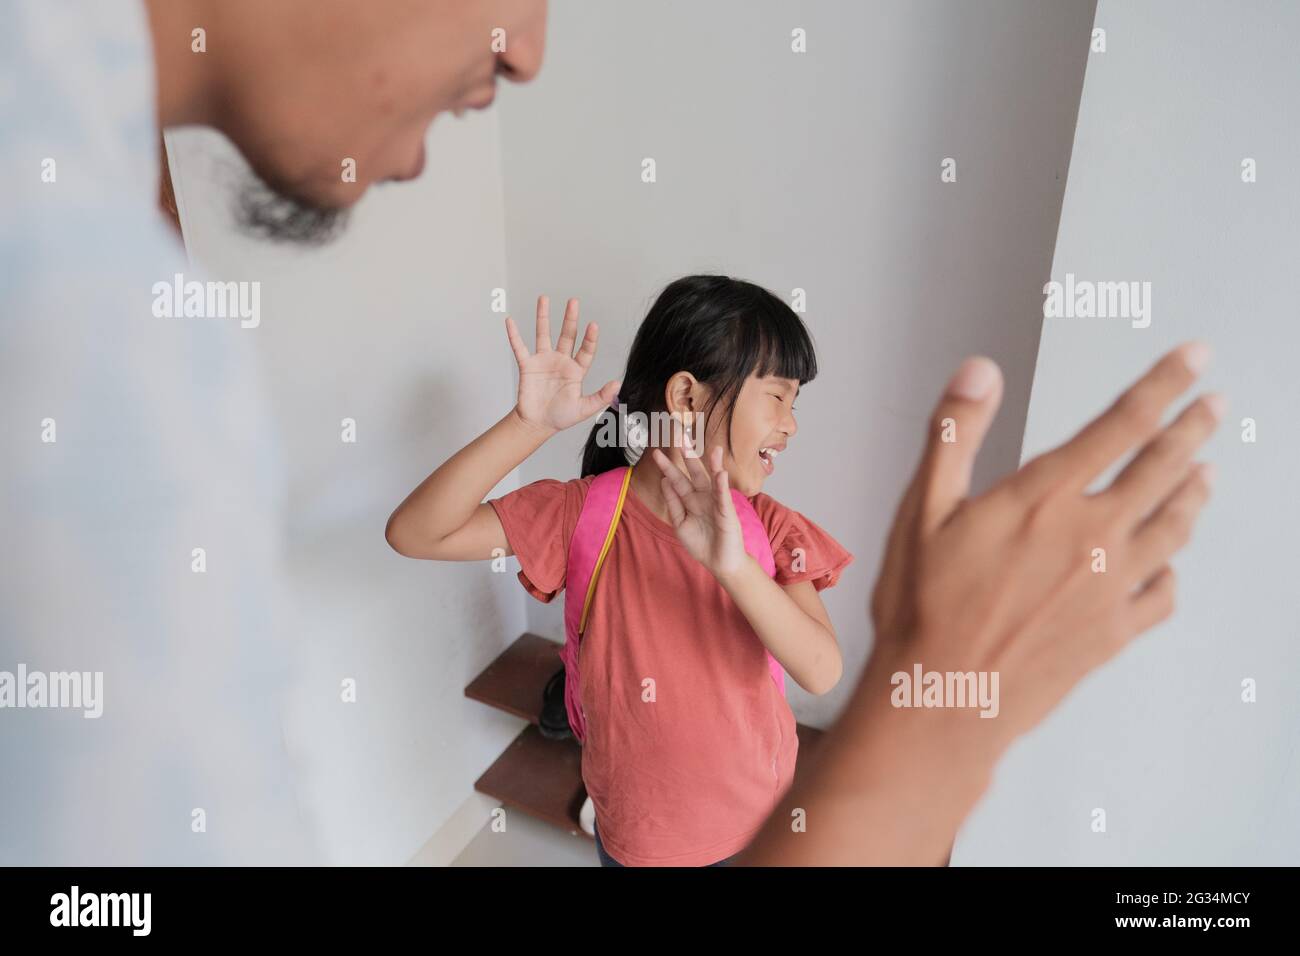 abusive parent try to hit his kid at home Stock Photo